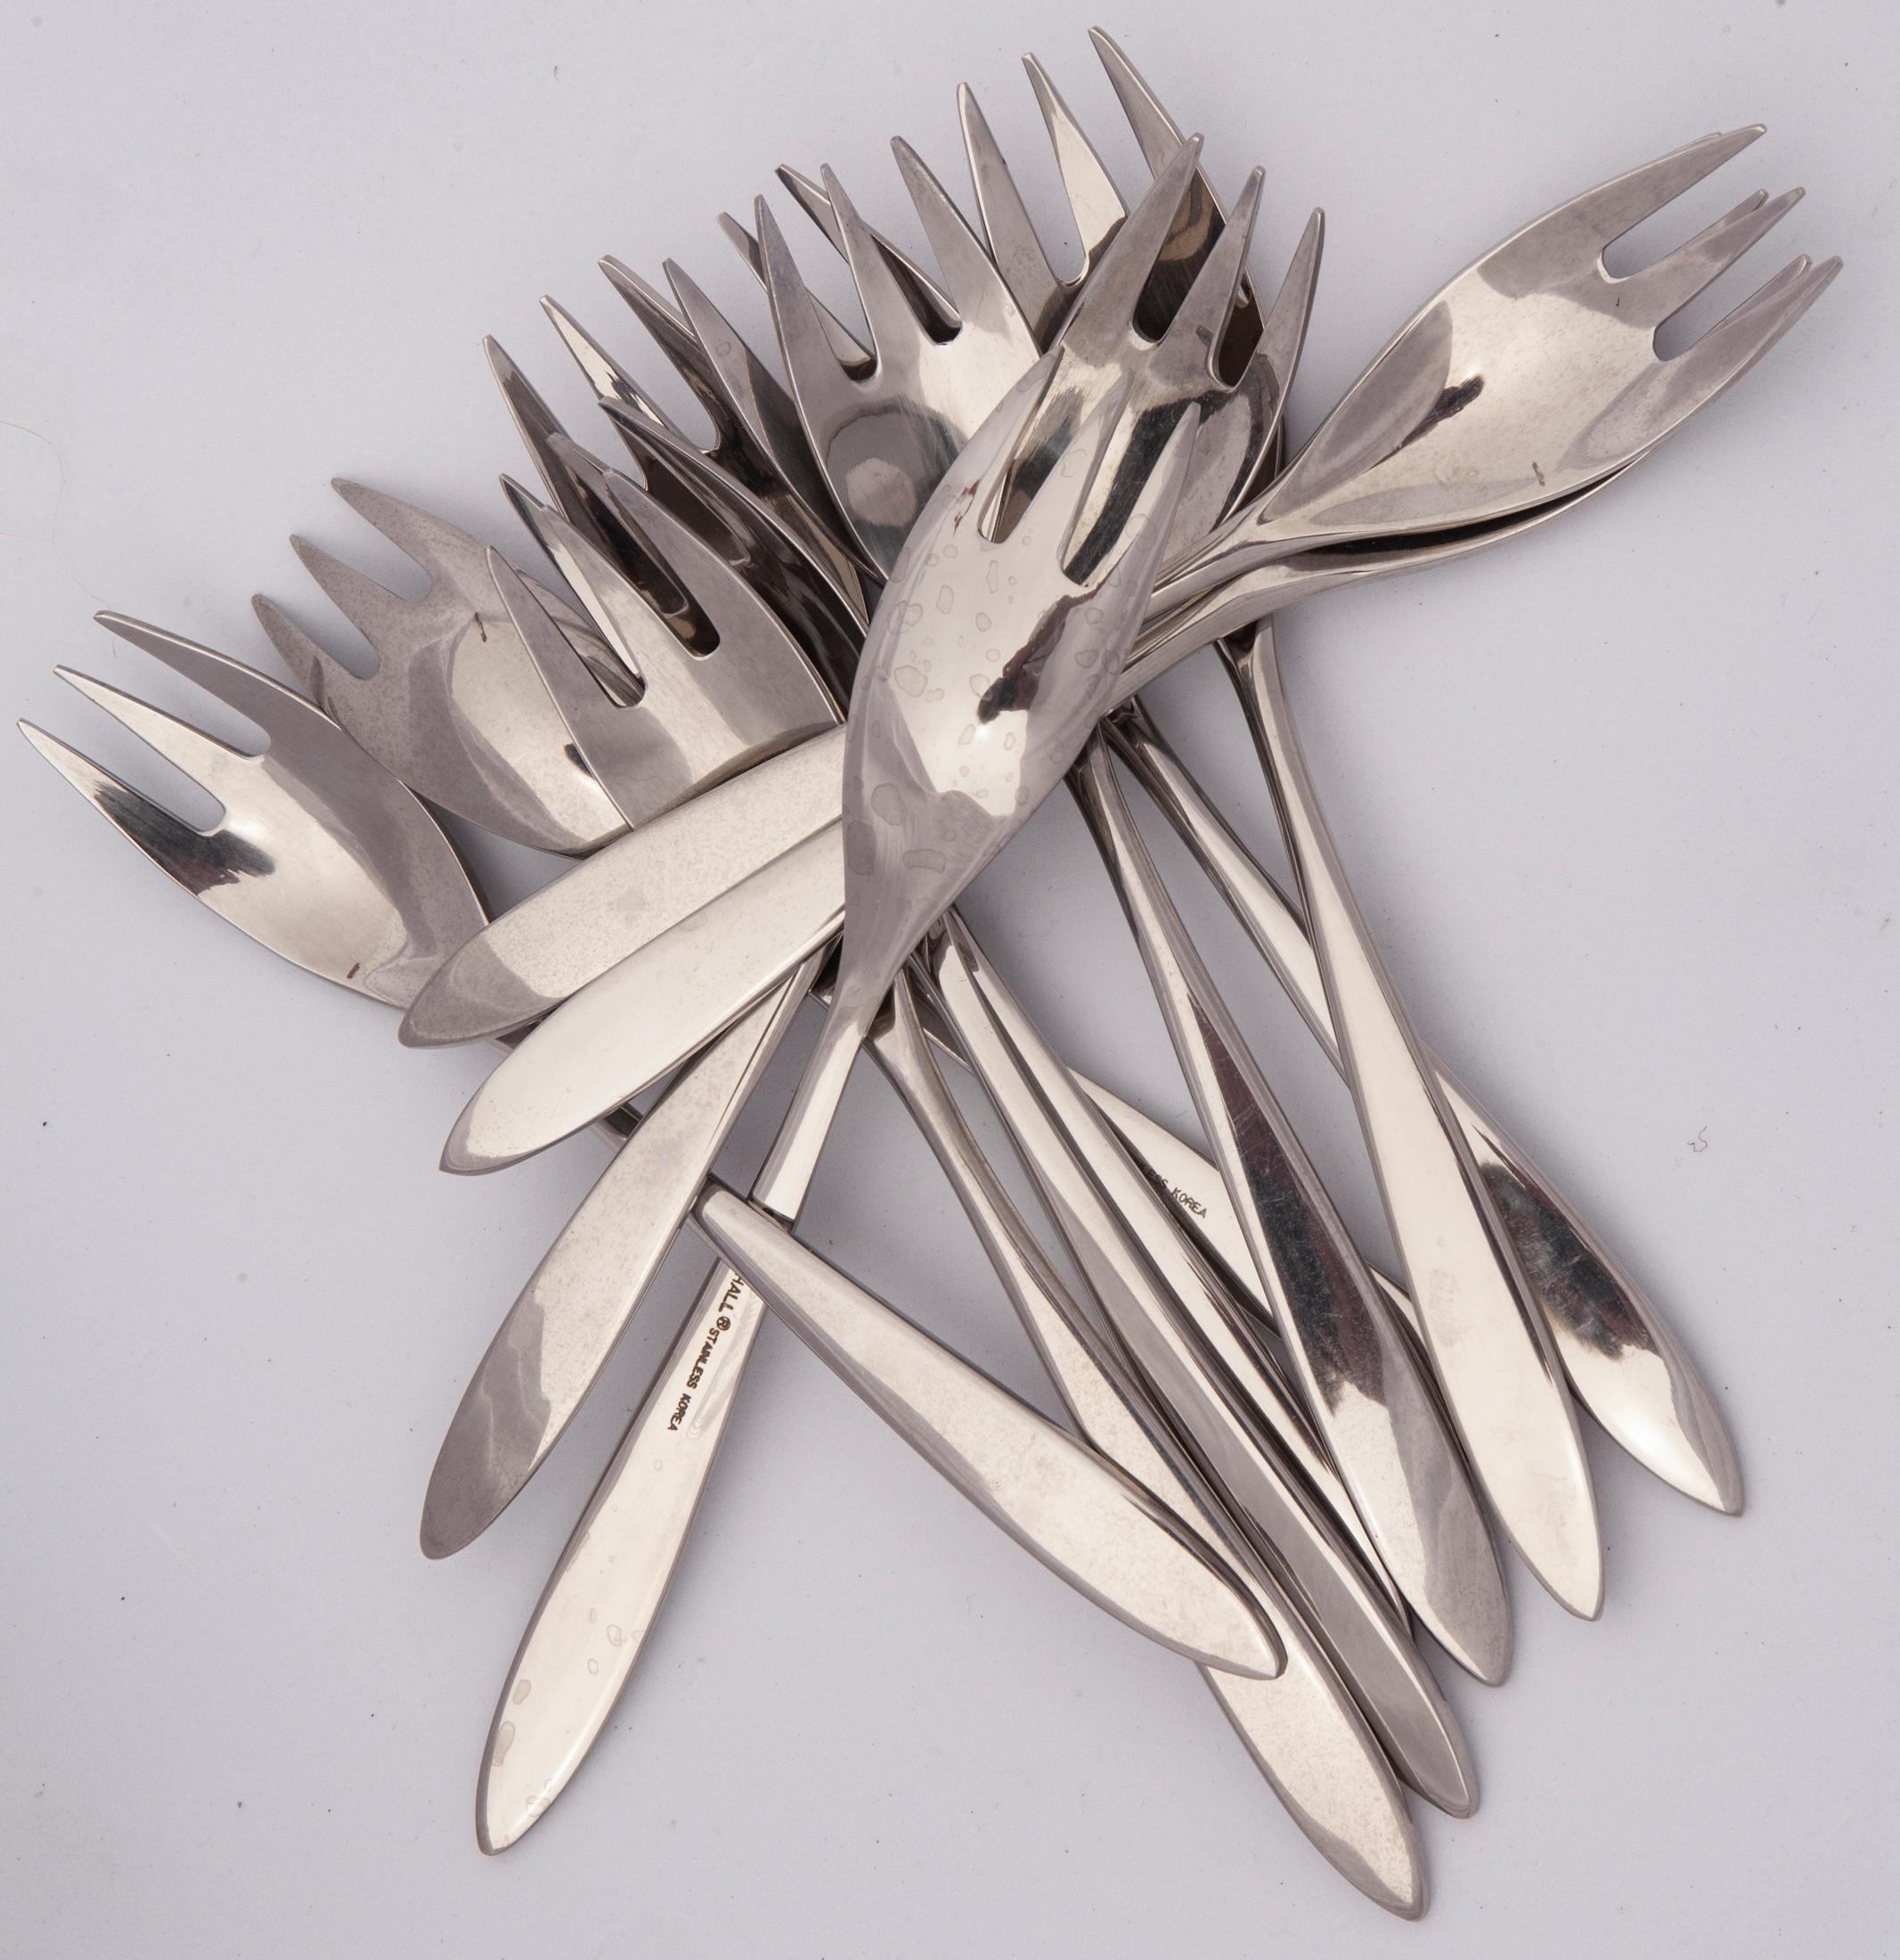 20th Century Scandinavian Modern Style Stainless-Steel Flatware by Oxford Hall; 60 pieces